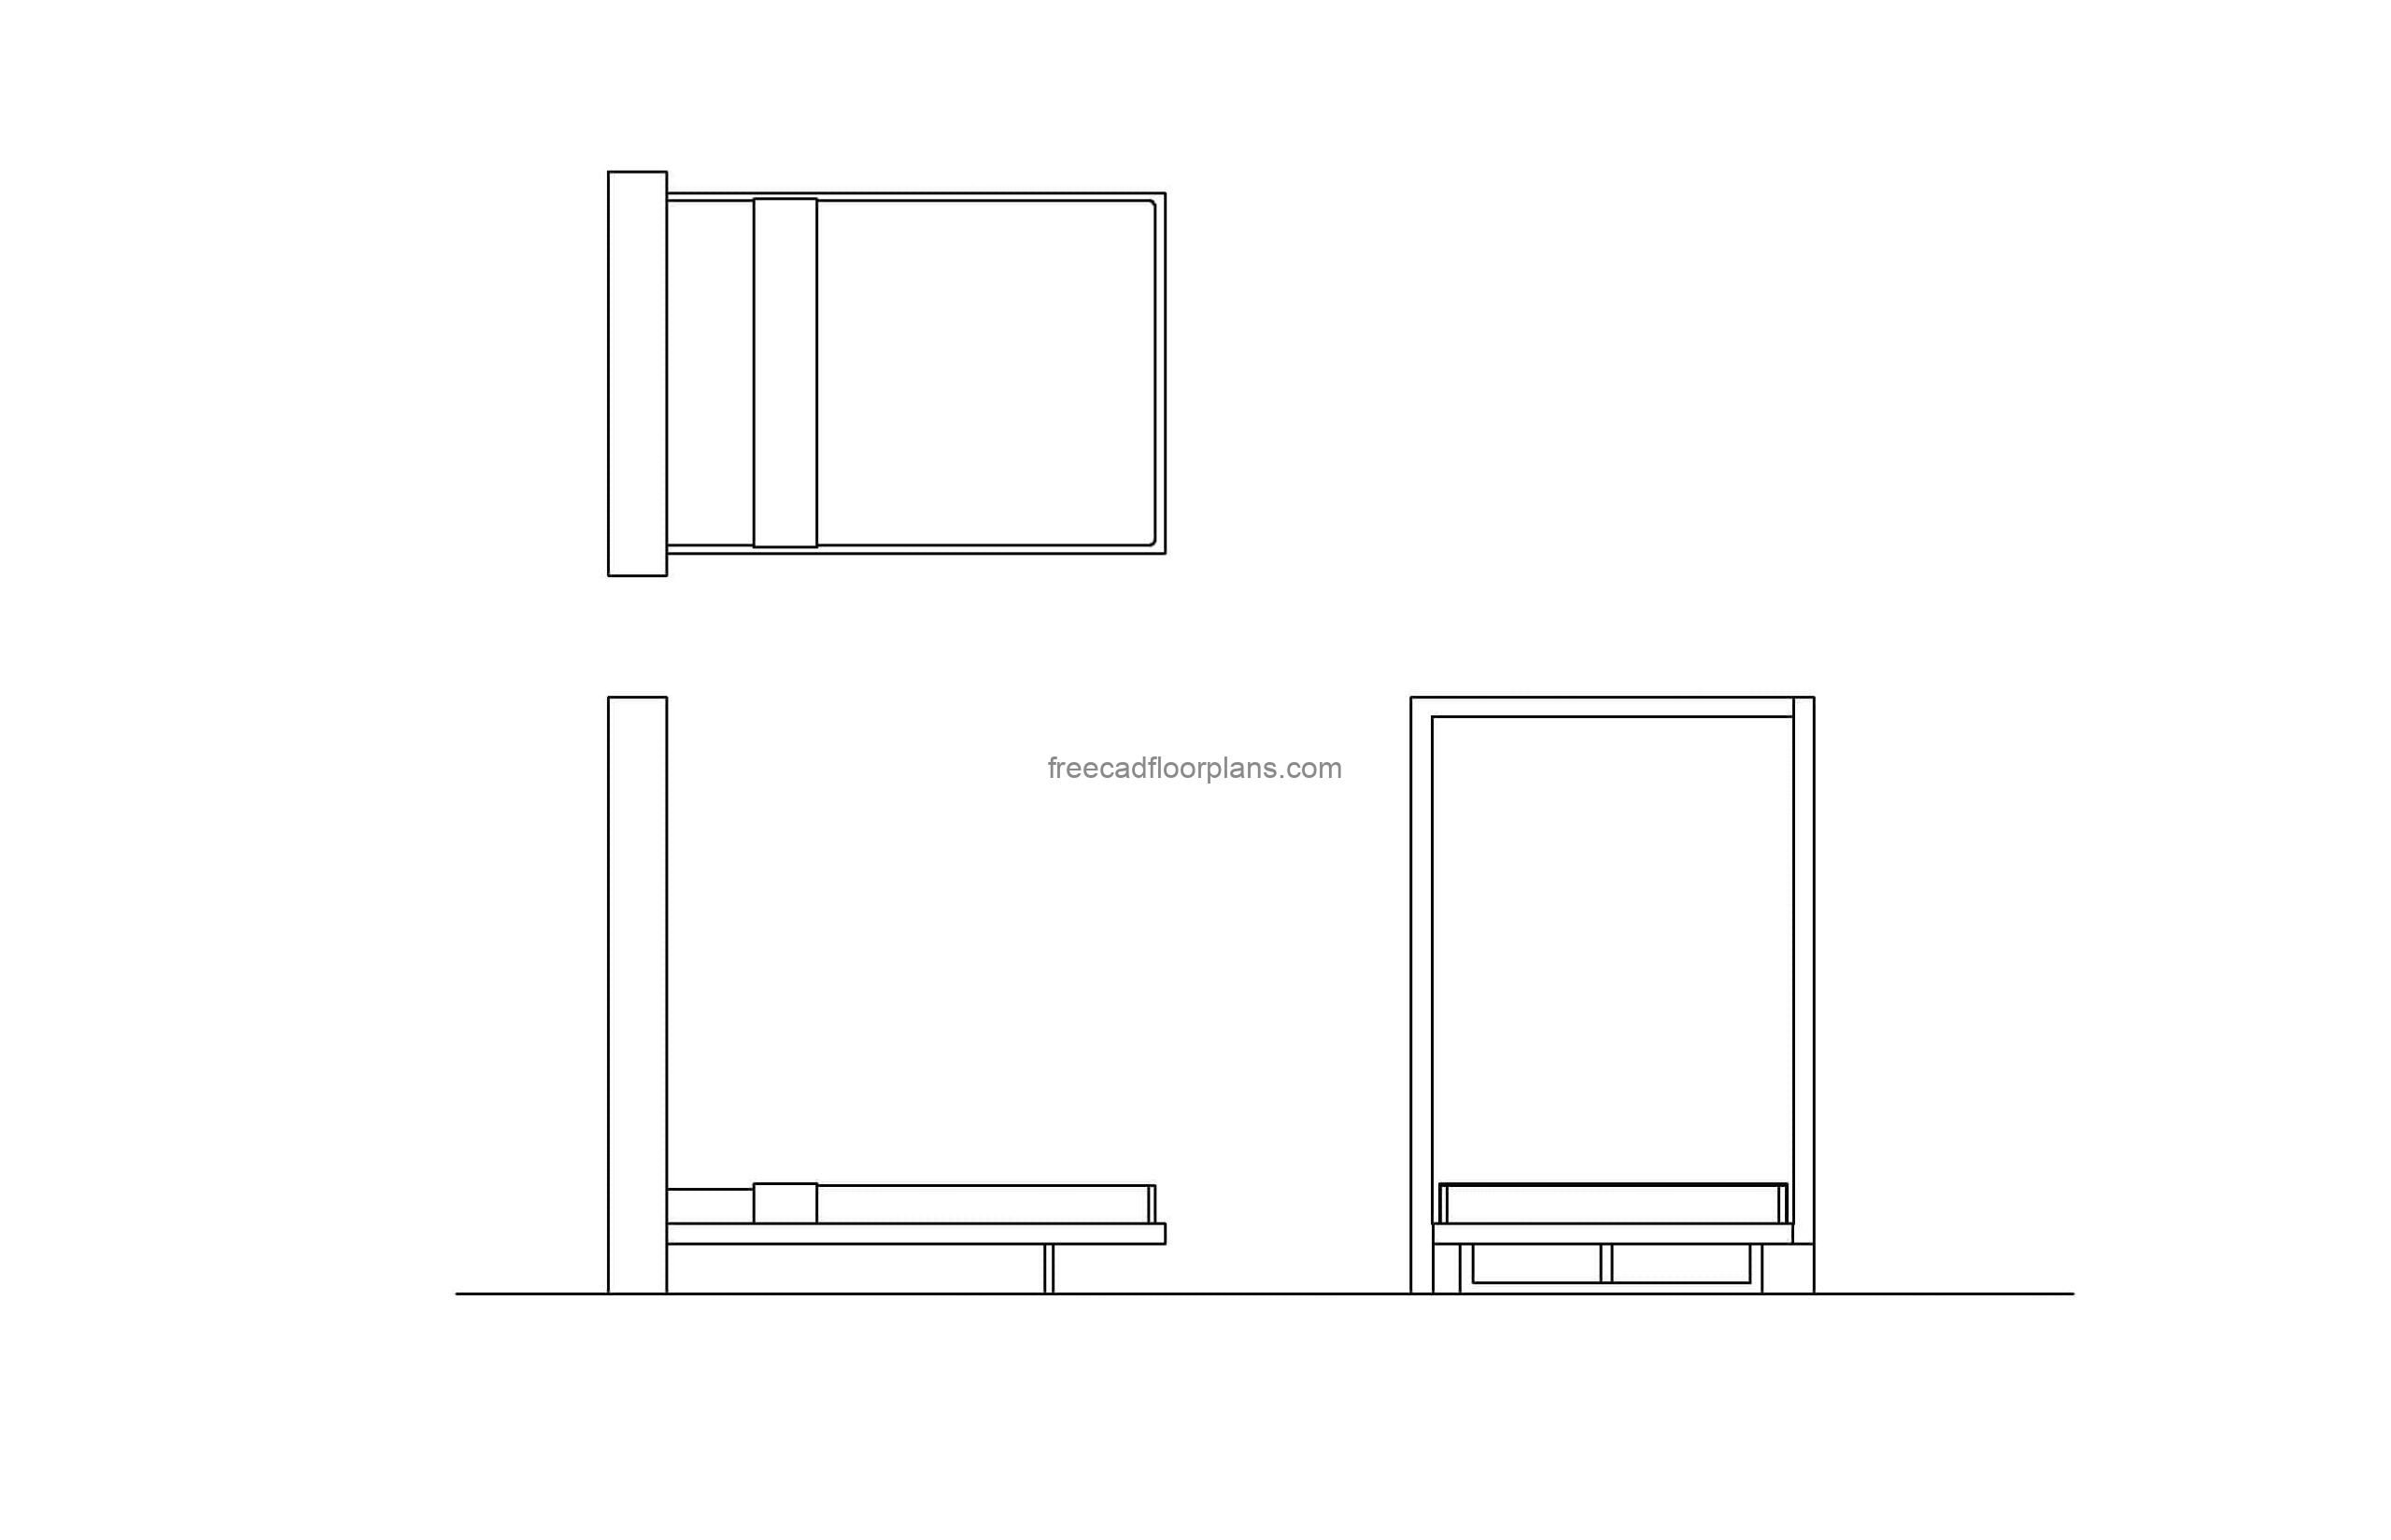 Murphy Bed autocad drawing plan and elevations 2d views, dwg file for free download